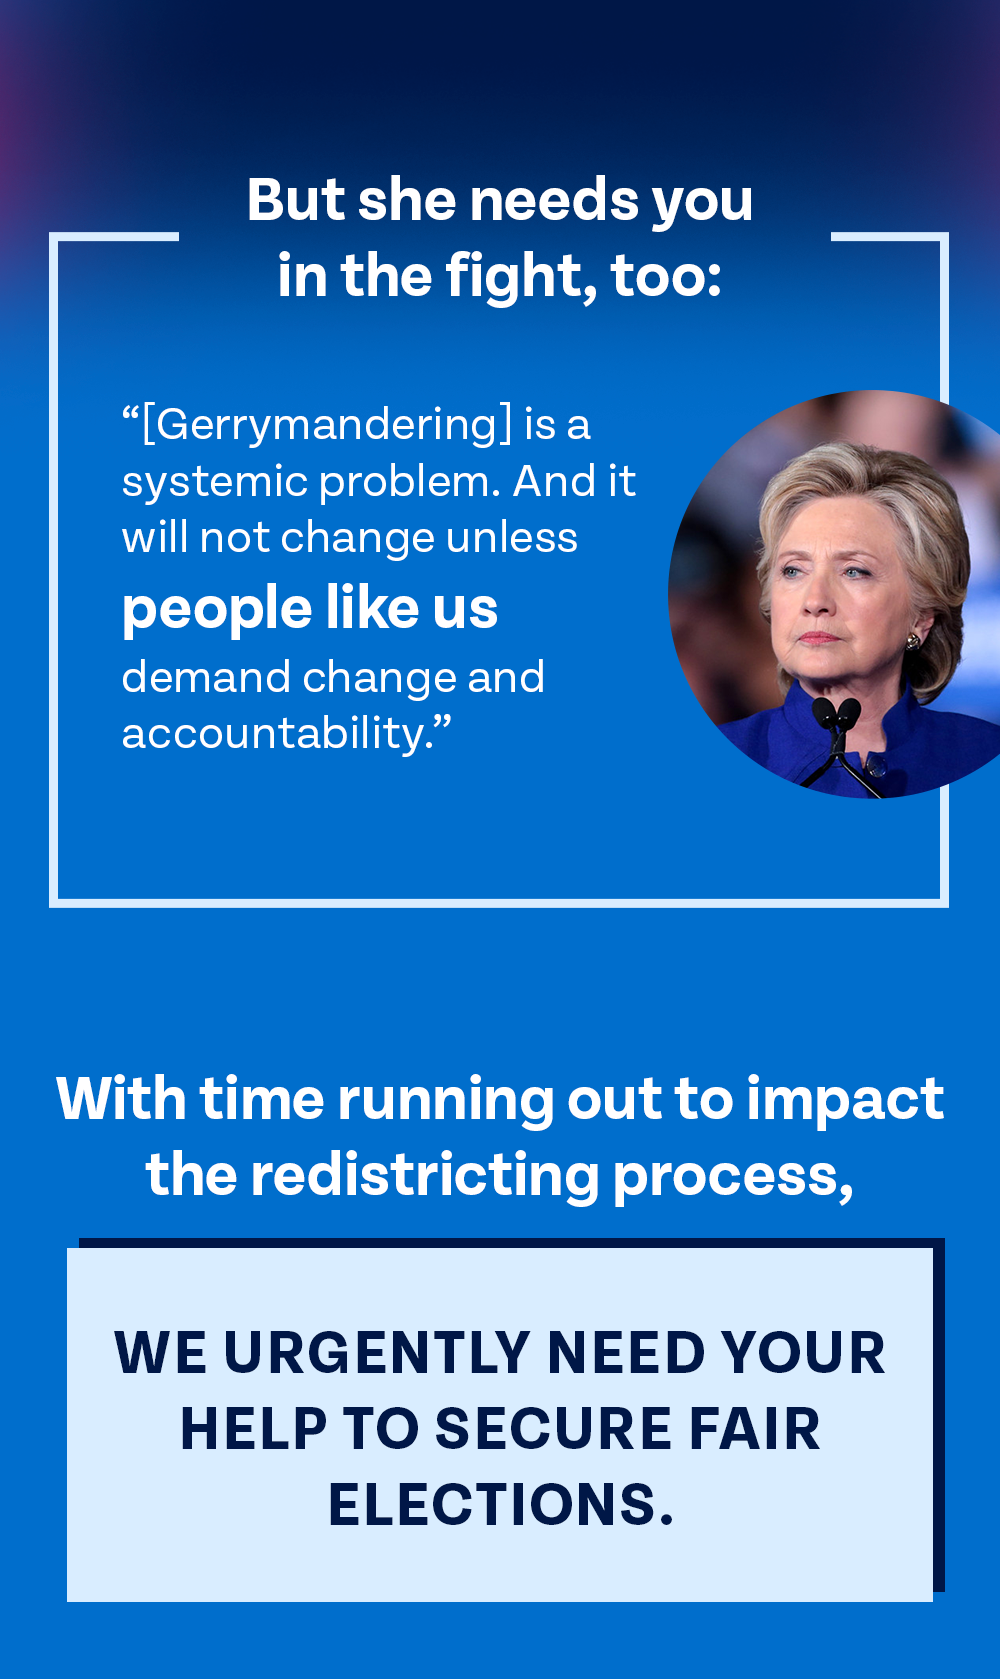 But she needs you in the fight, too: 
Gerrymandering is a systemic problem. And it will not change unless people like us demand change and accountability. - HRC
With time running out to impact the redistricting process, we urgently need your help to secure fair elections.